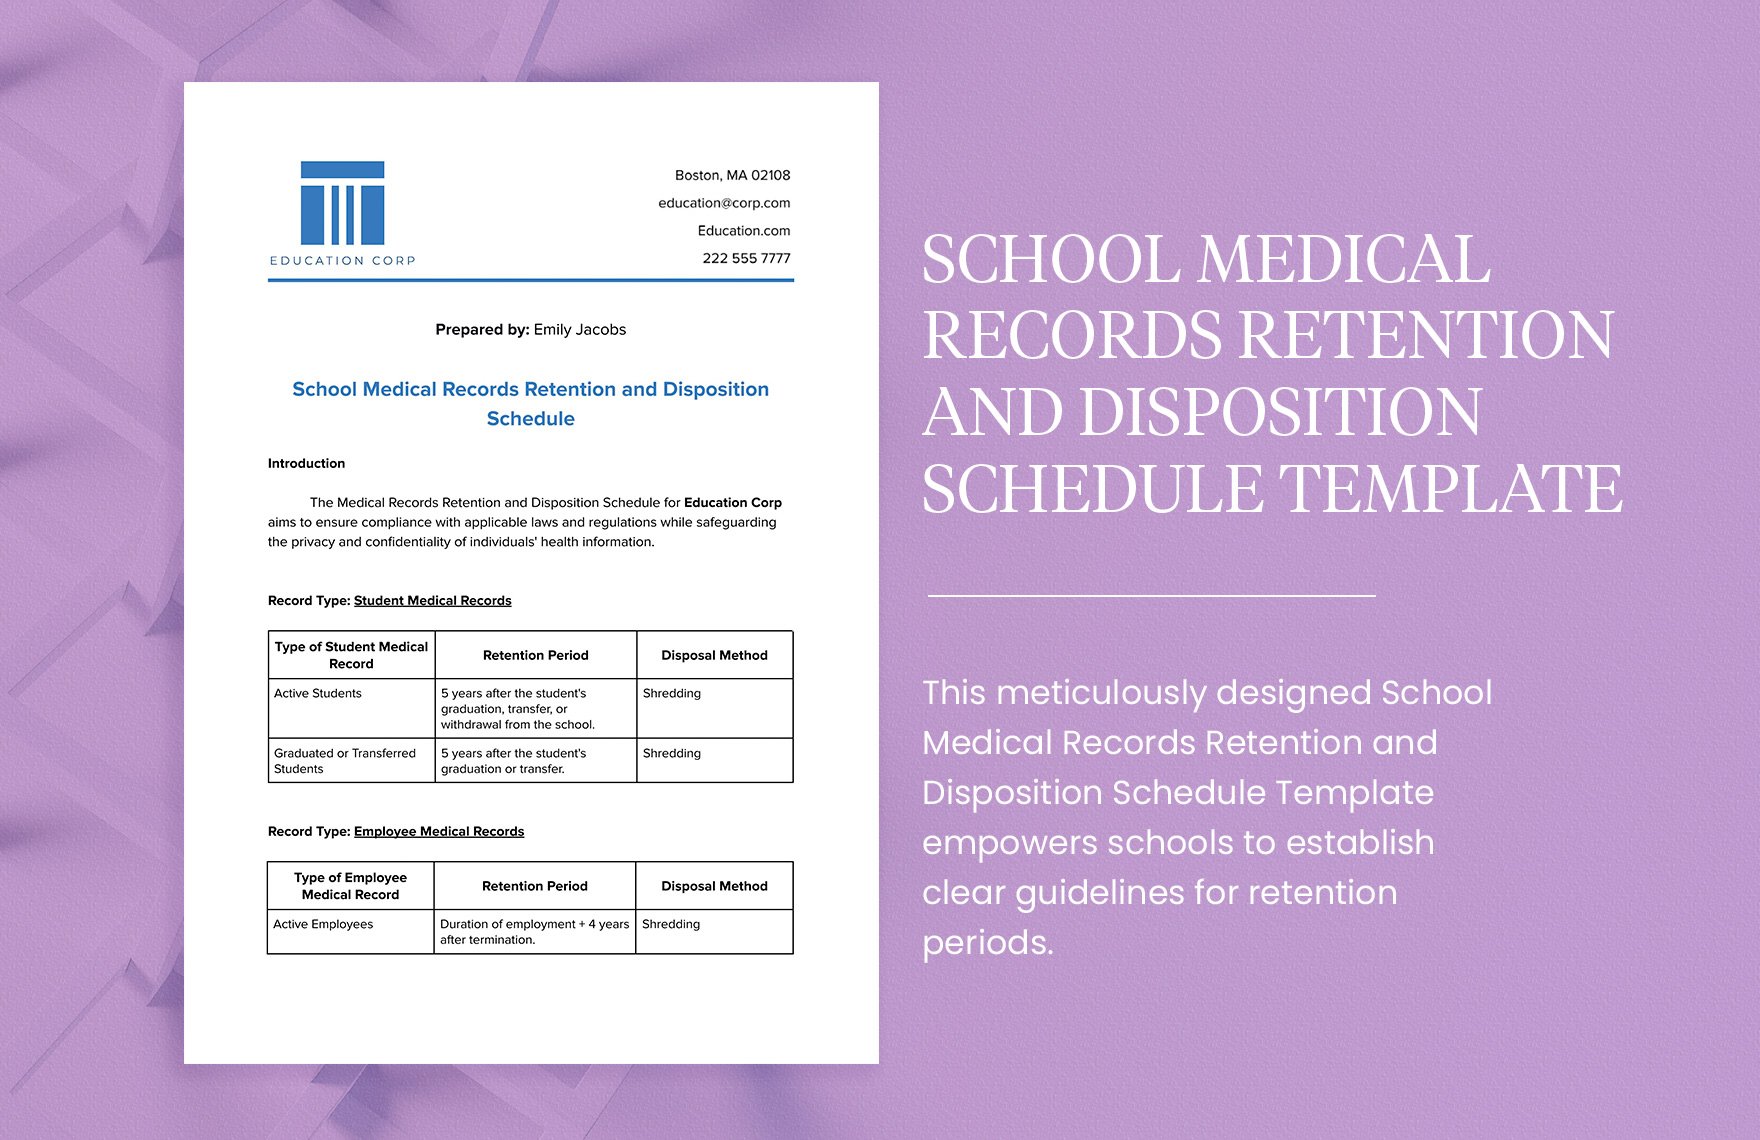 School Medical Records Retention and Disposition Schedule Template